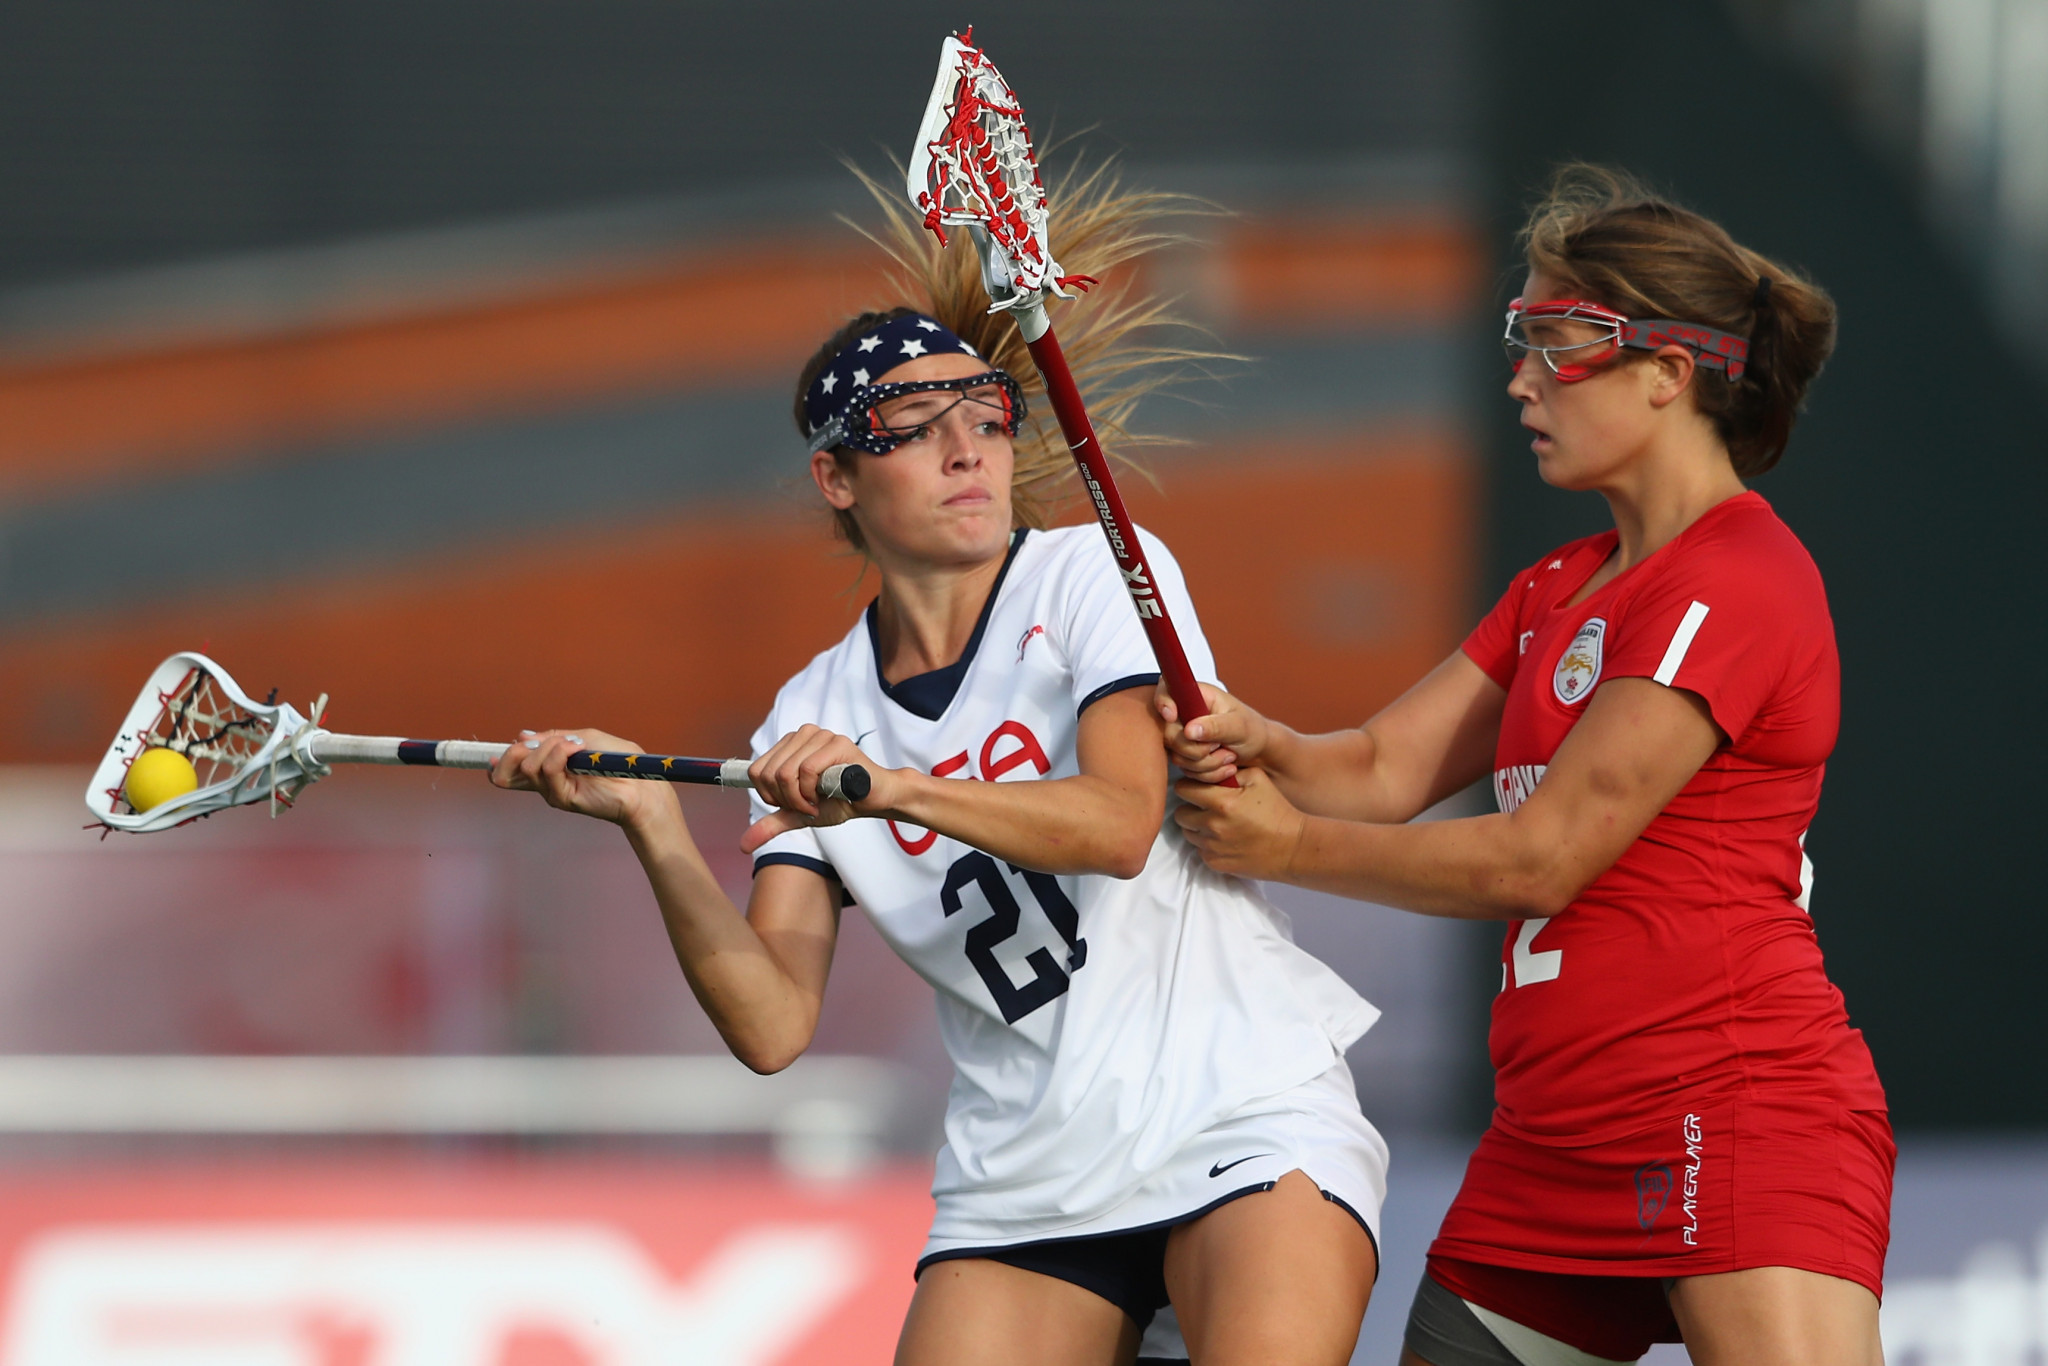 Reigning champions United States start as favourites at Women’s World Lacrosse Championship